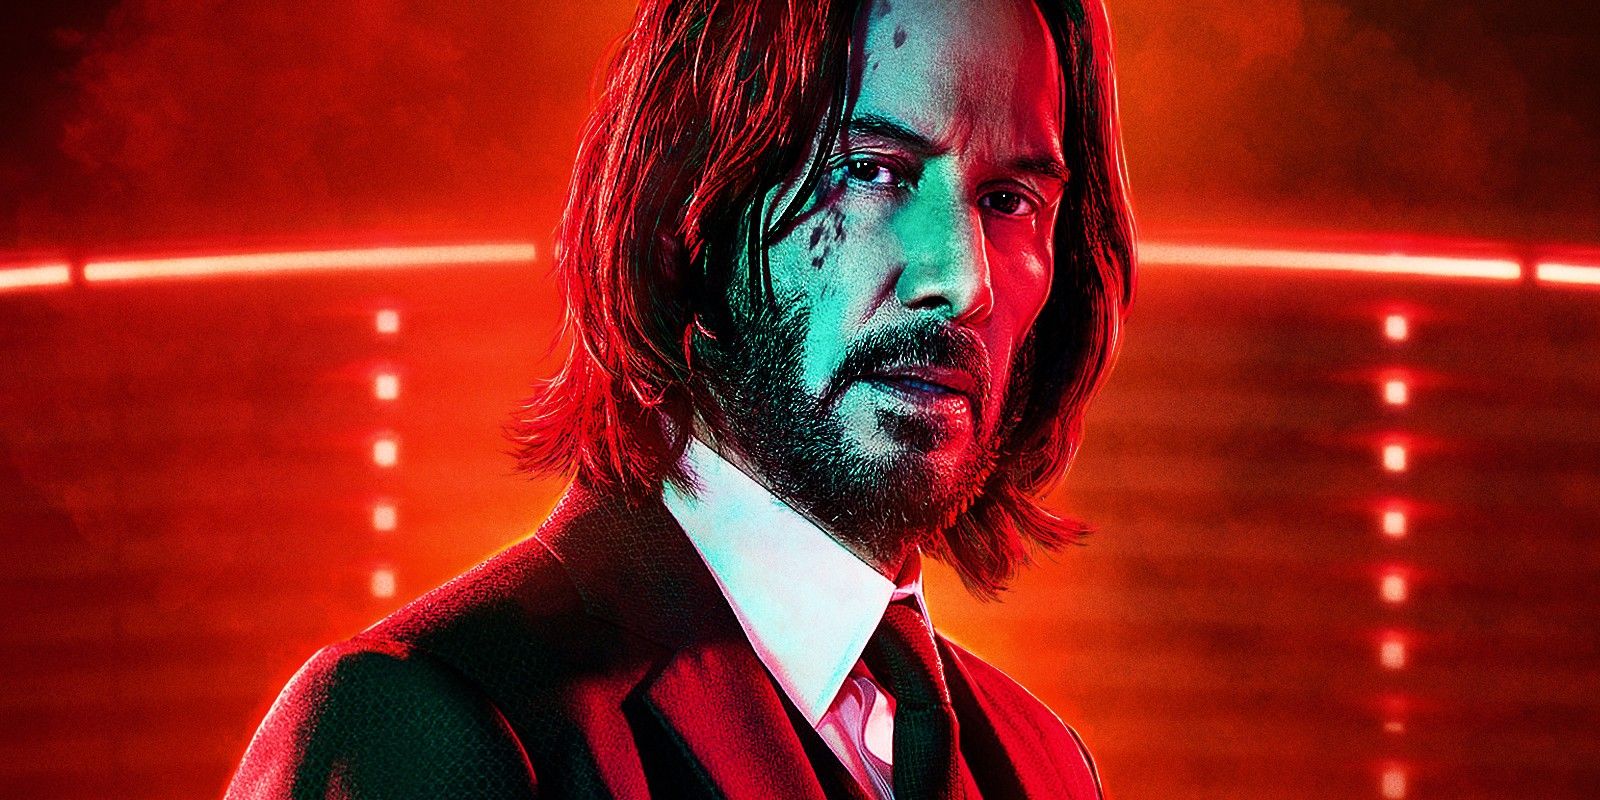 Keanu Reeves in John Wick 4 with red lights